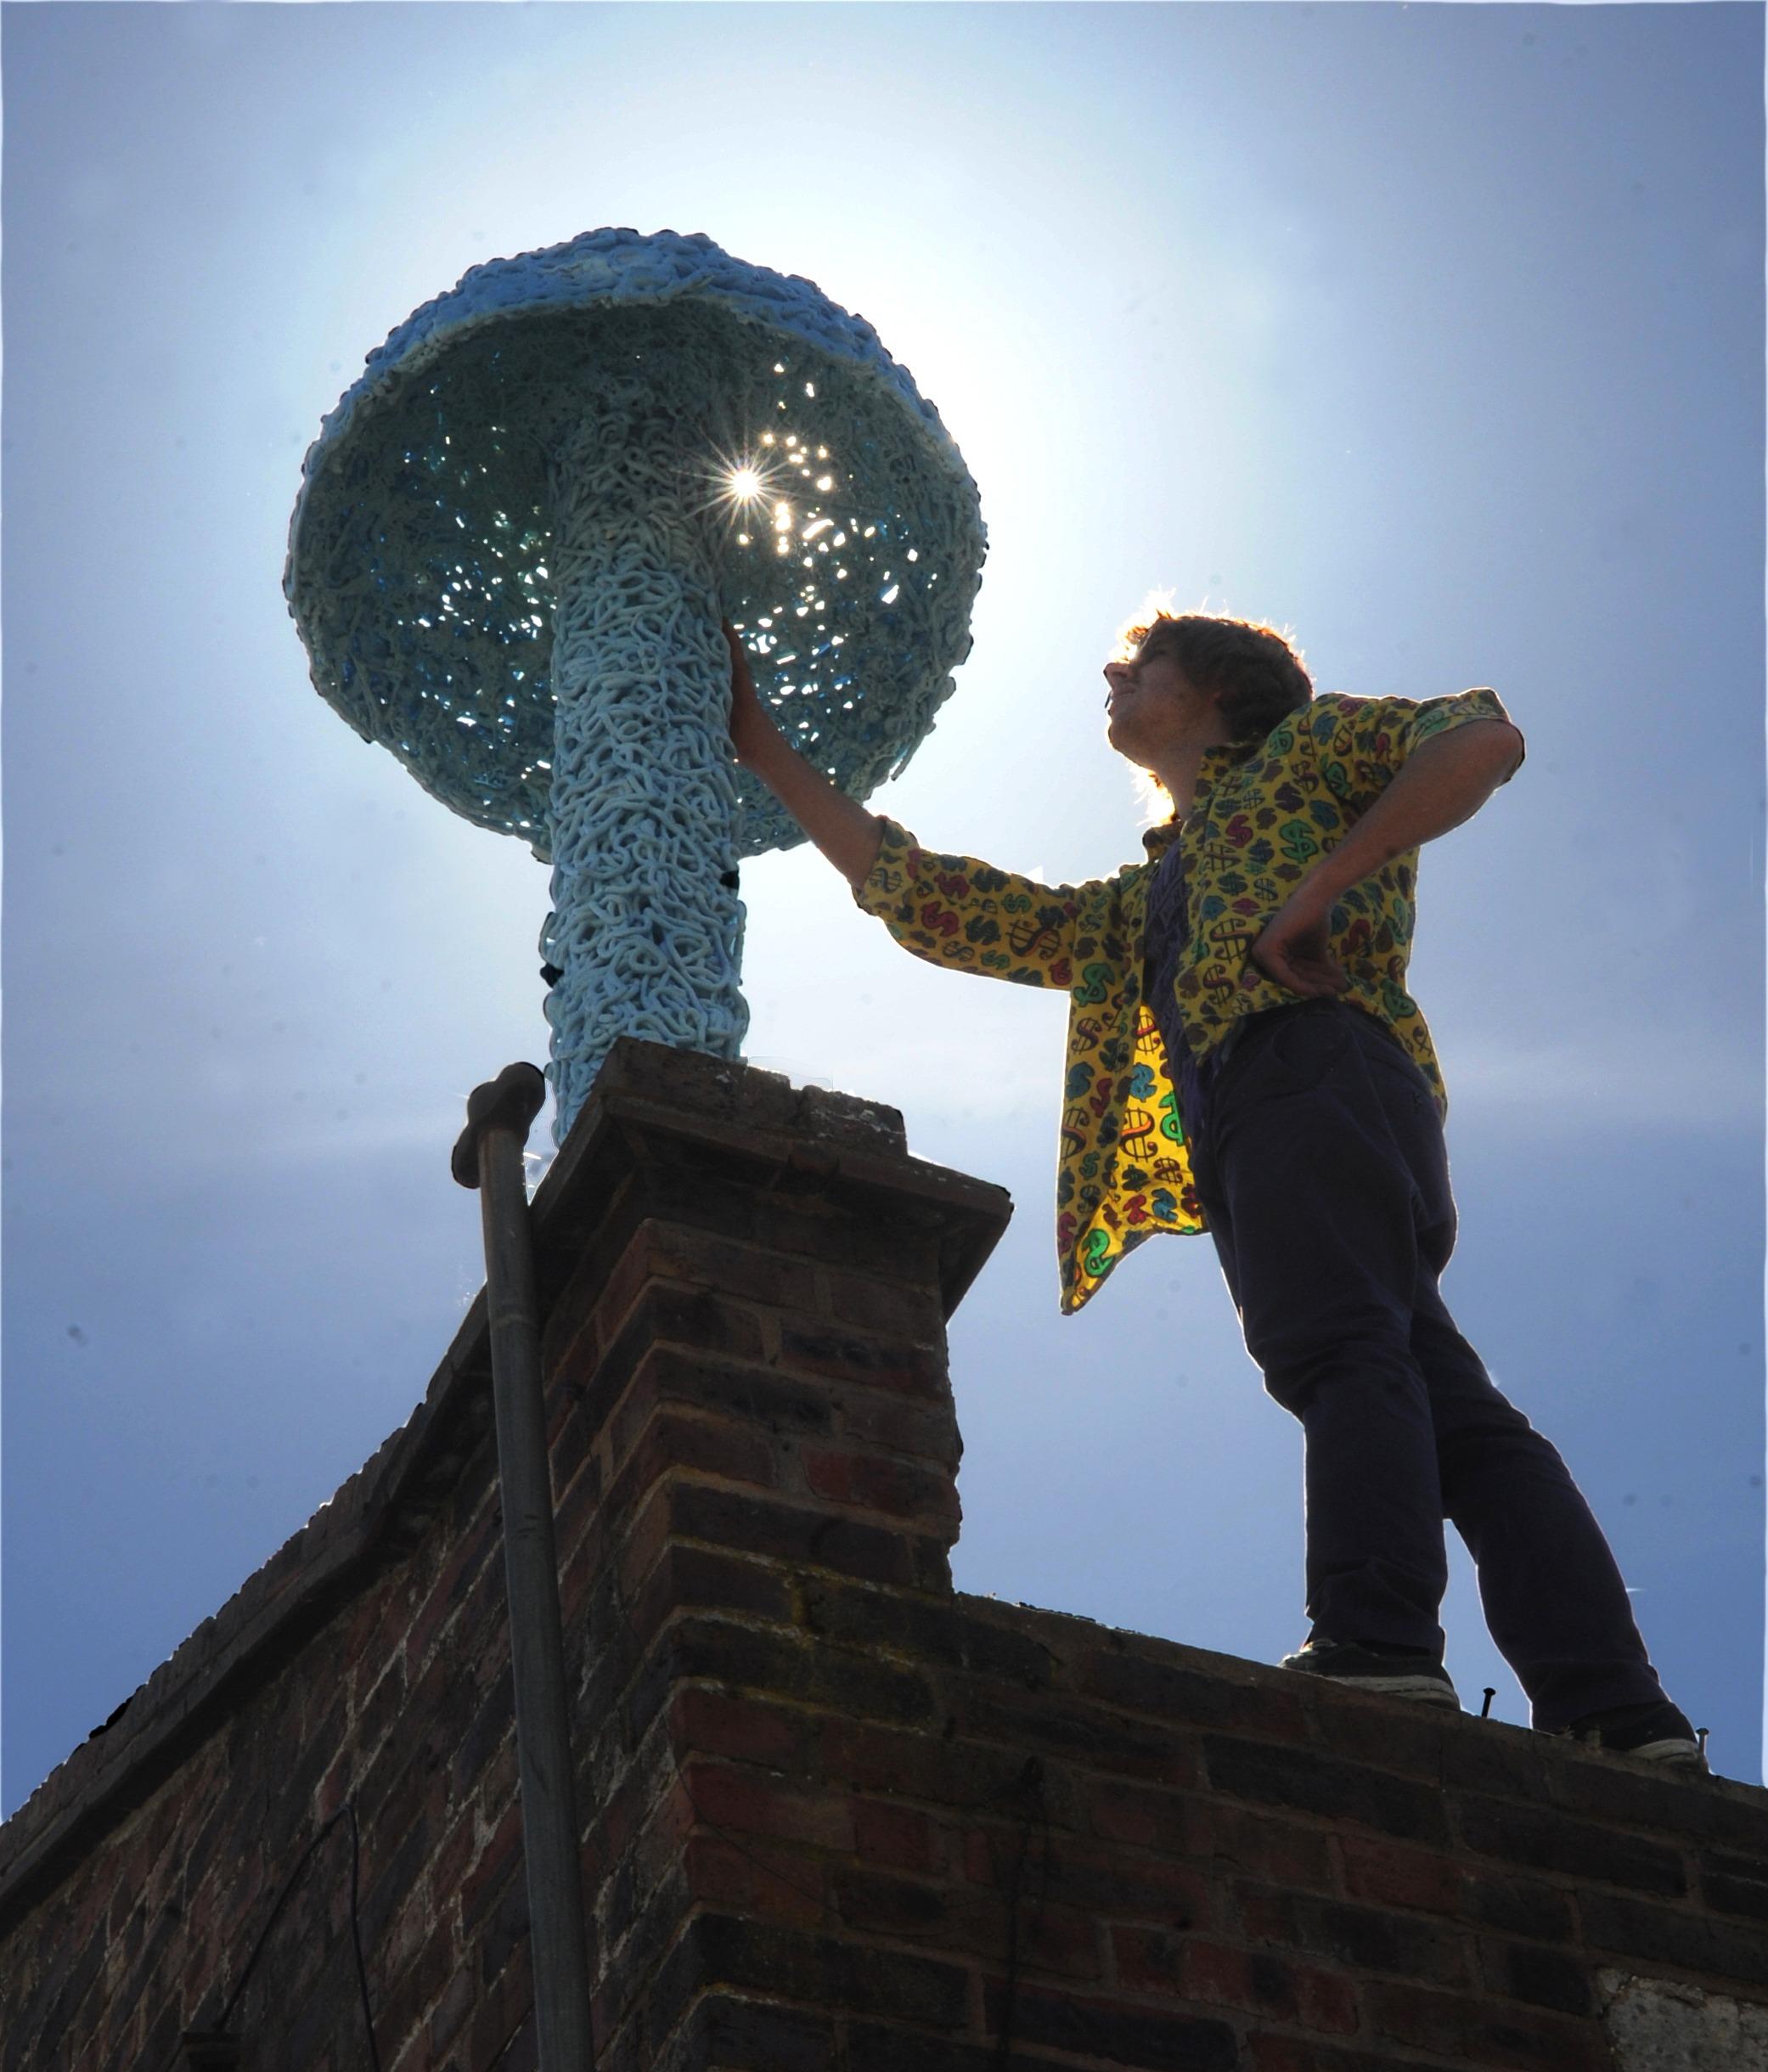 Rooftop art -  A street artists applies the finishing touches to his mushroom sculpture. 


Picture by Louise Adams C130629-1 Ent Street Art ENGSUS00120130705105105